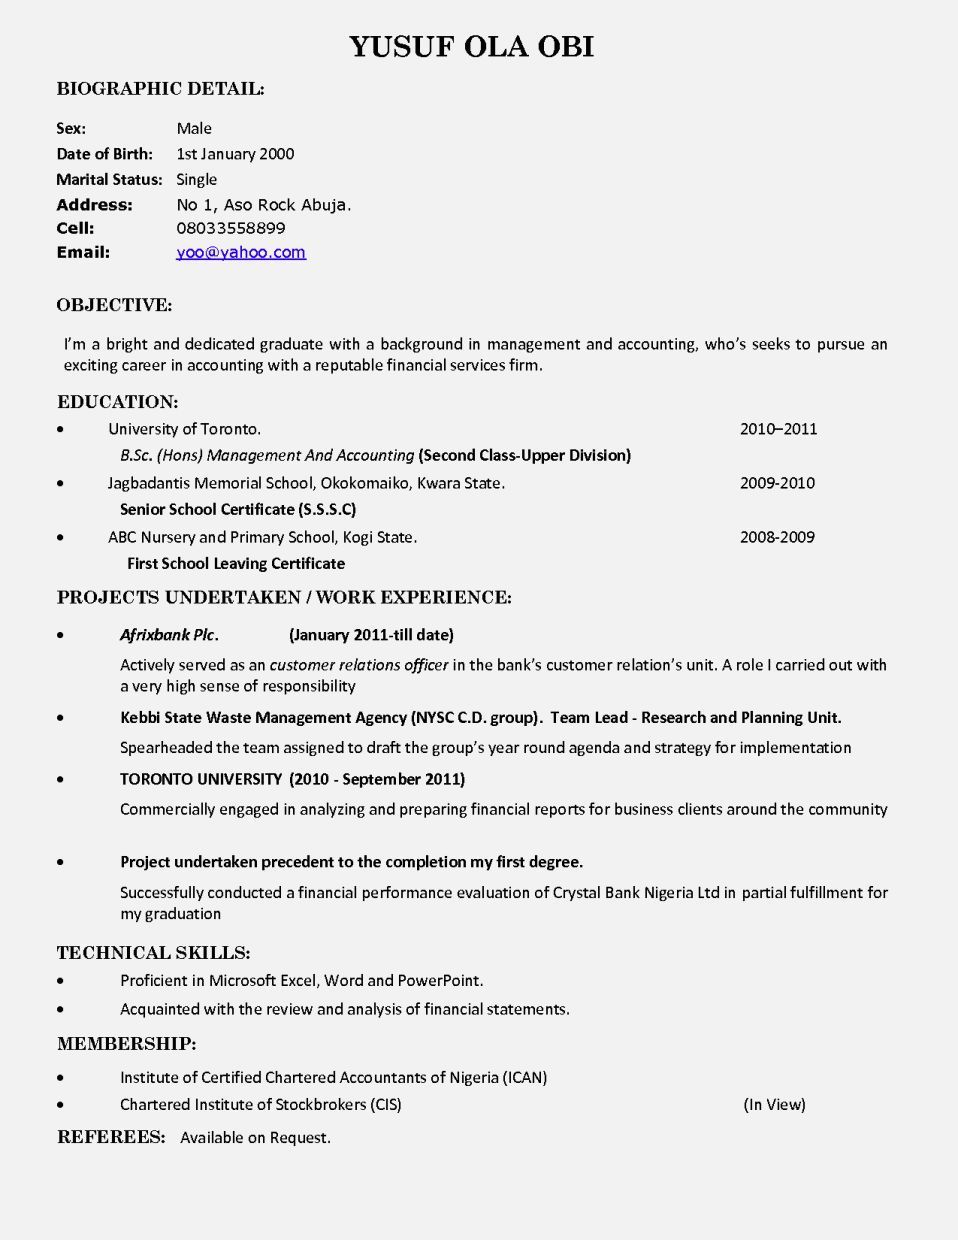 Image Result For Sample Of Curriculum Vitae In Nigeria with size 958 X 1240